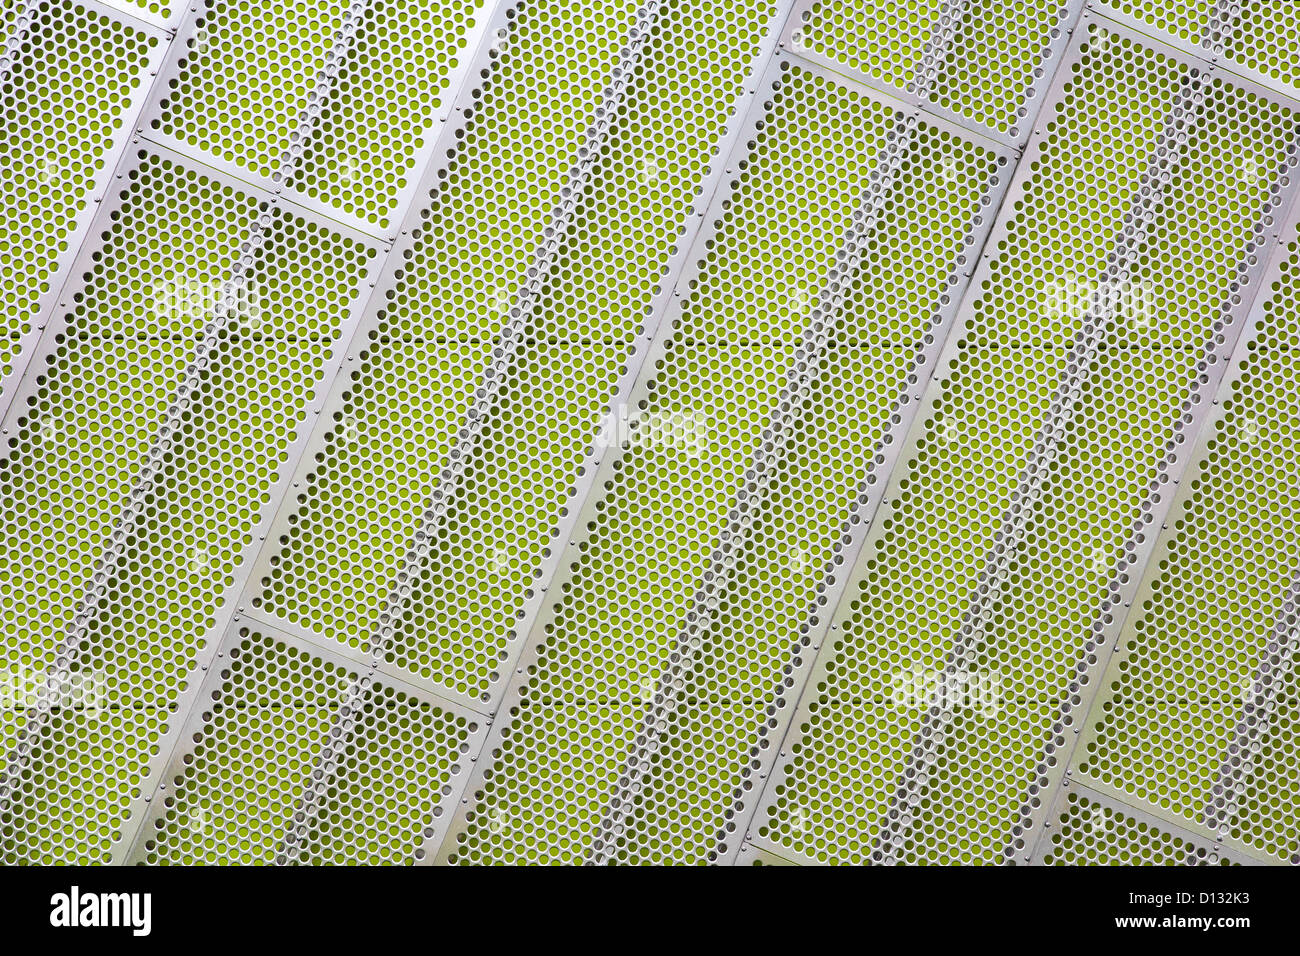 Steel facade cladding with a mesh of holes on a green wall Stock Photo